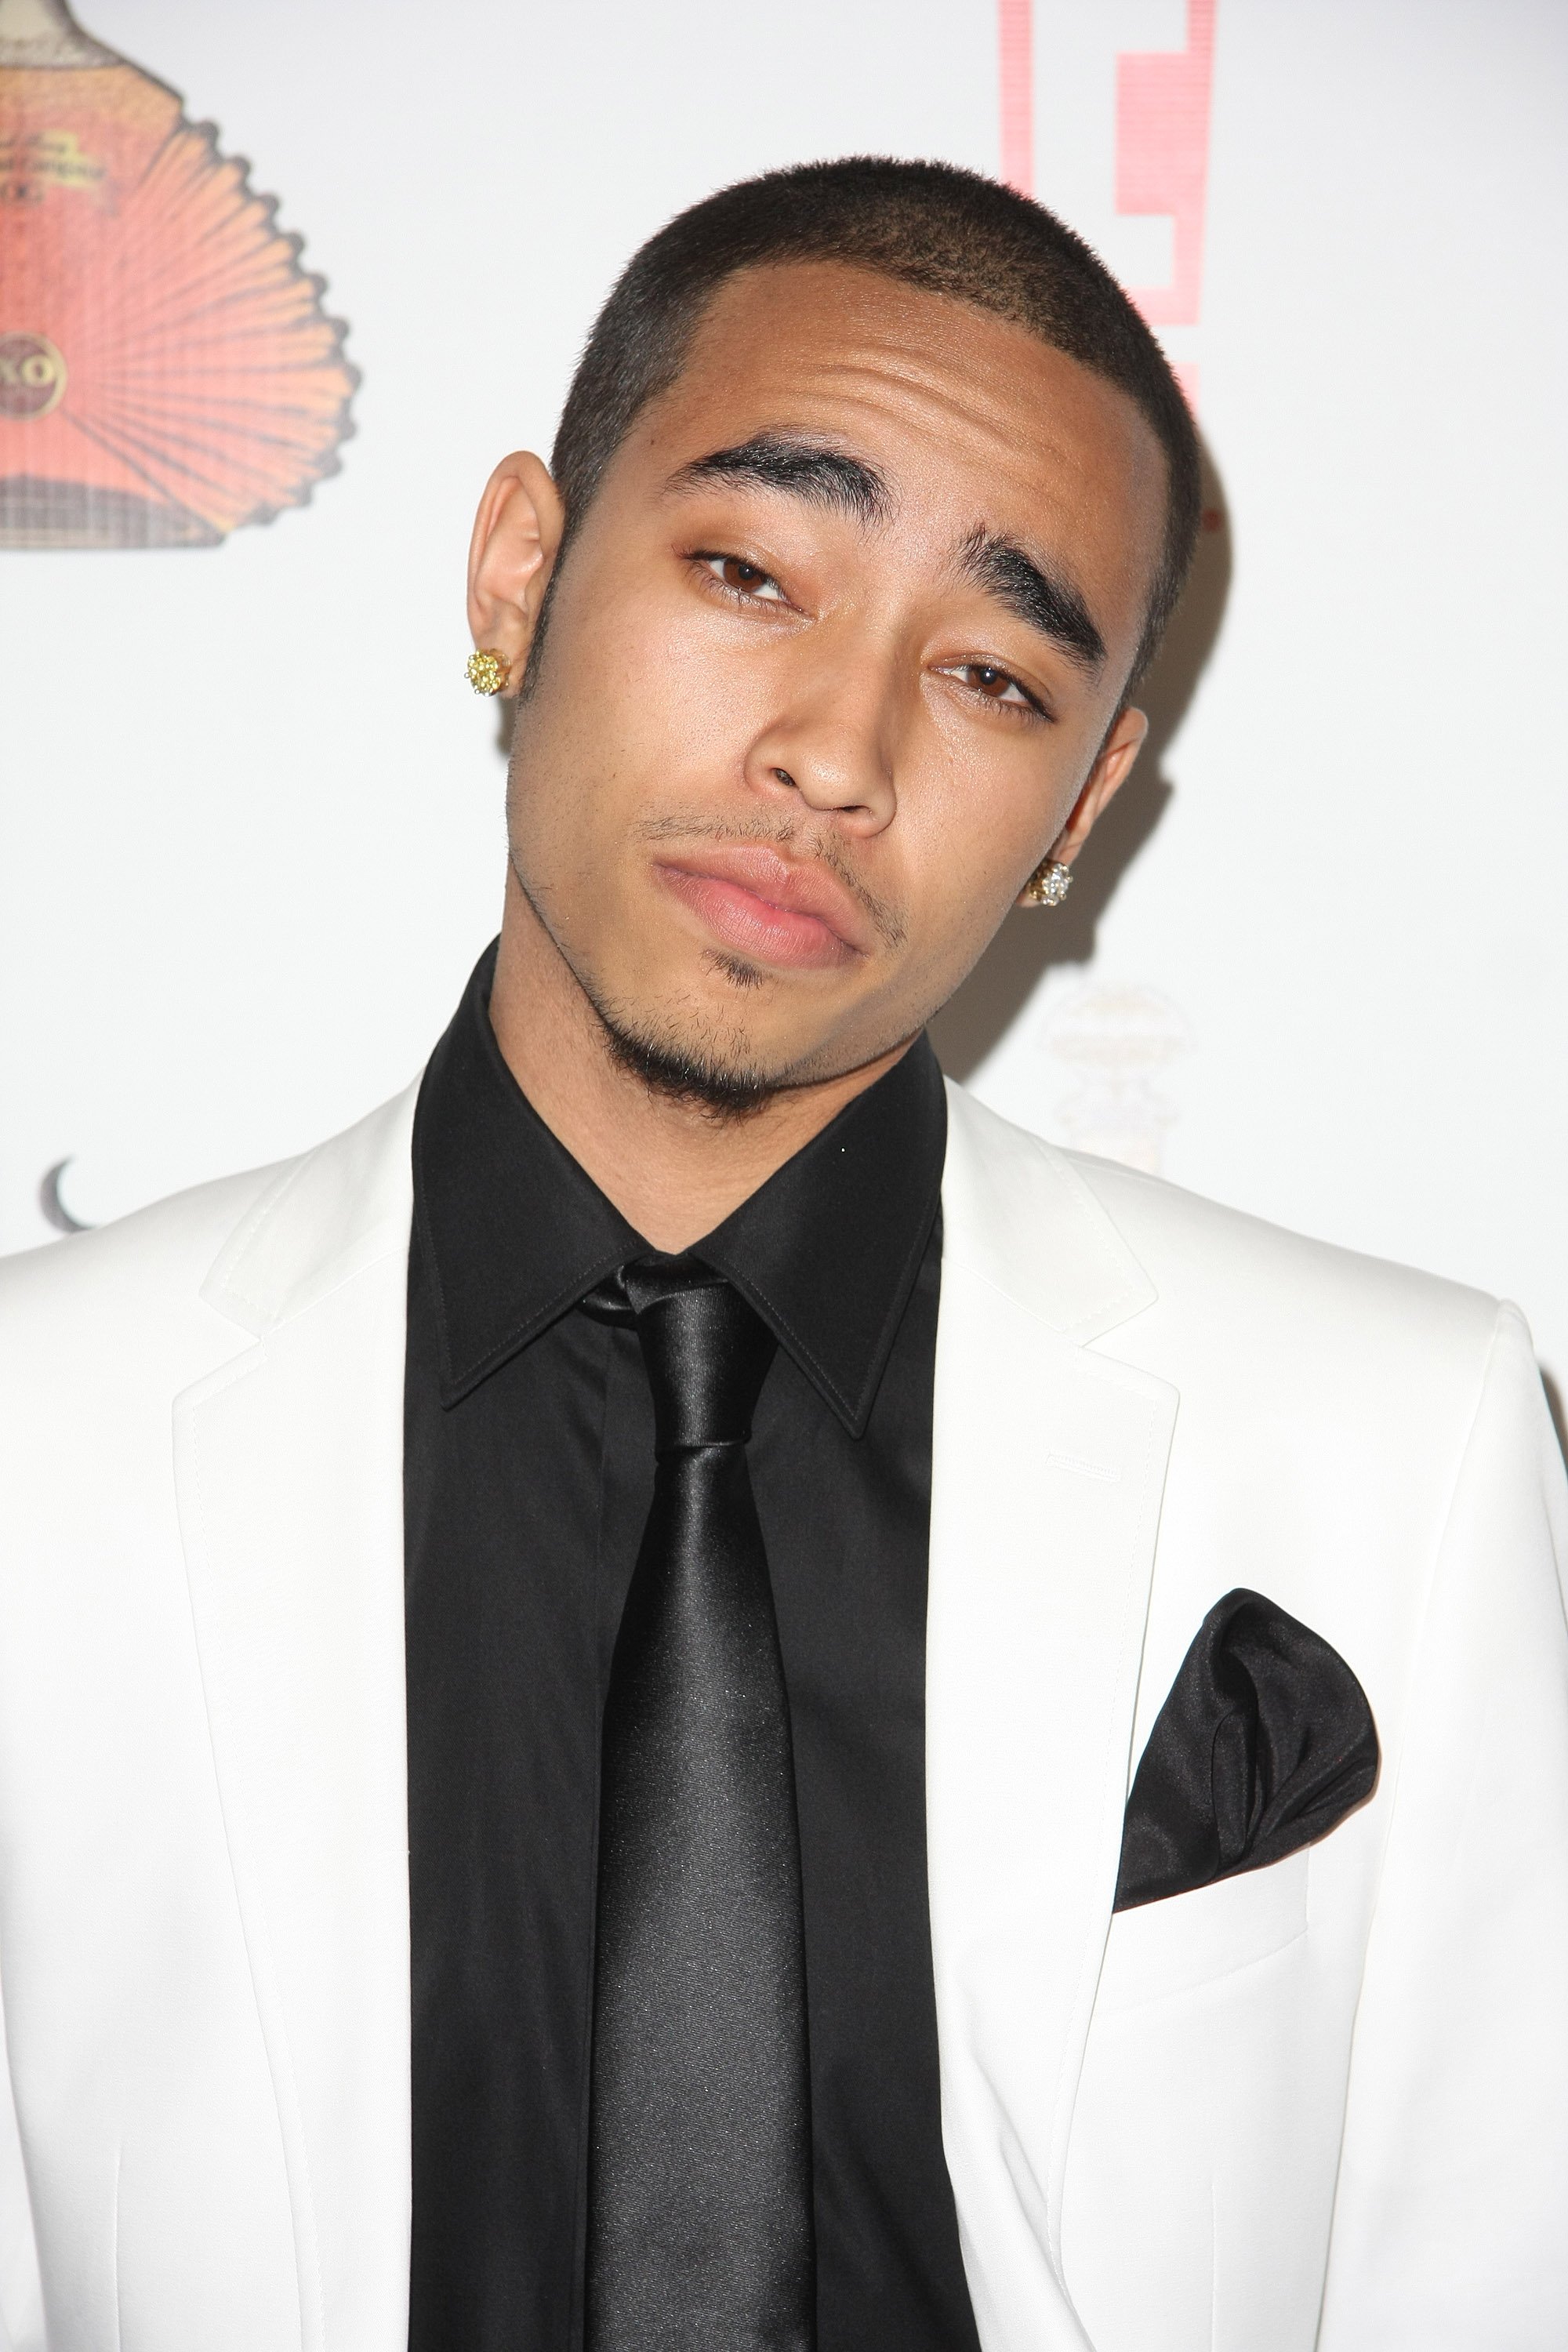 Ice-T's son Tracy "Little Ice" Marrow Jr. at the Ice-T and Coco vow renewal ceremony in 2011 in Hollywood, California. | Source: Getty Images